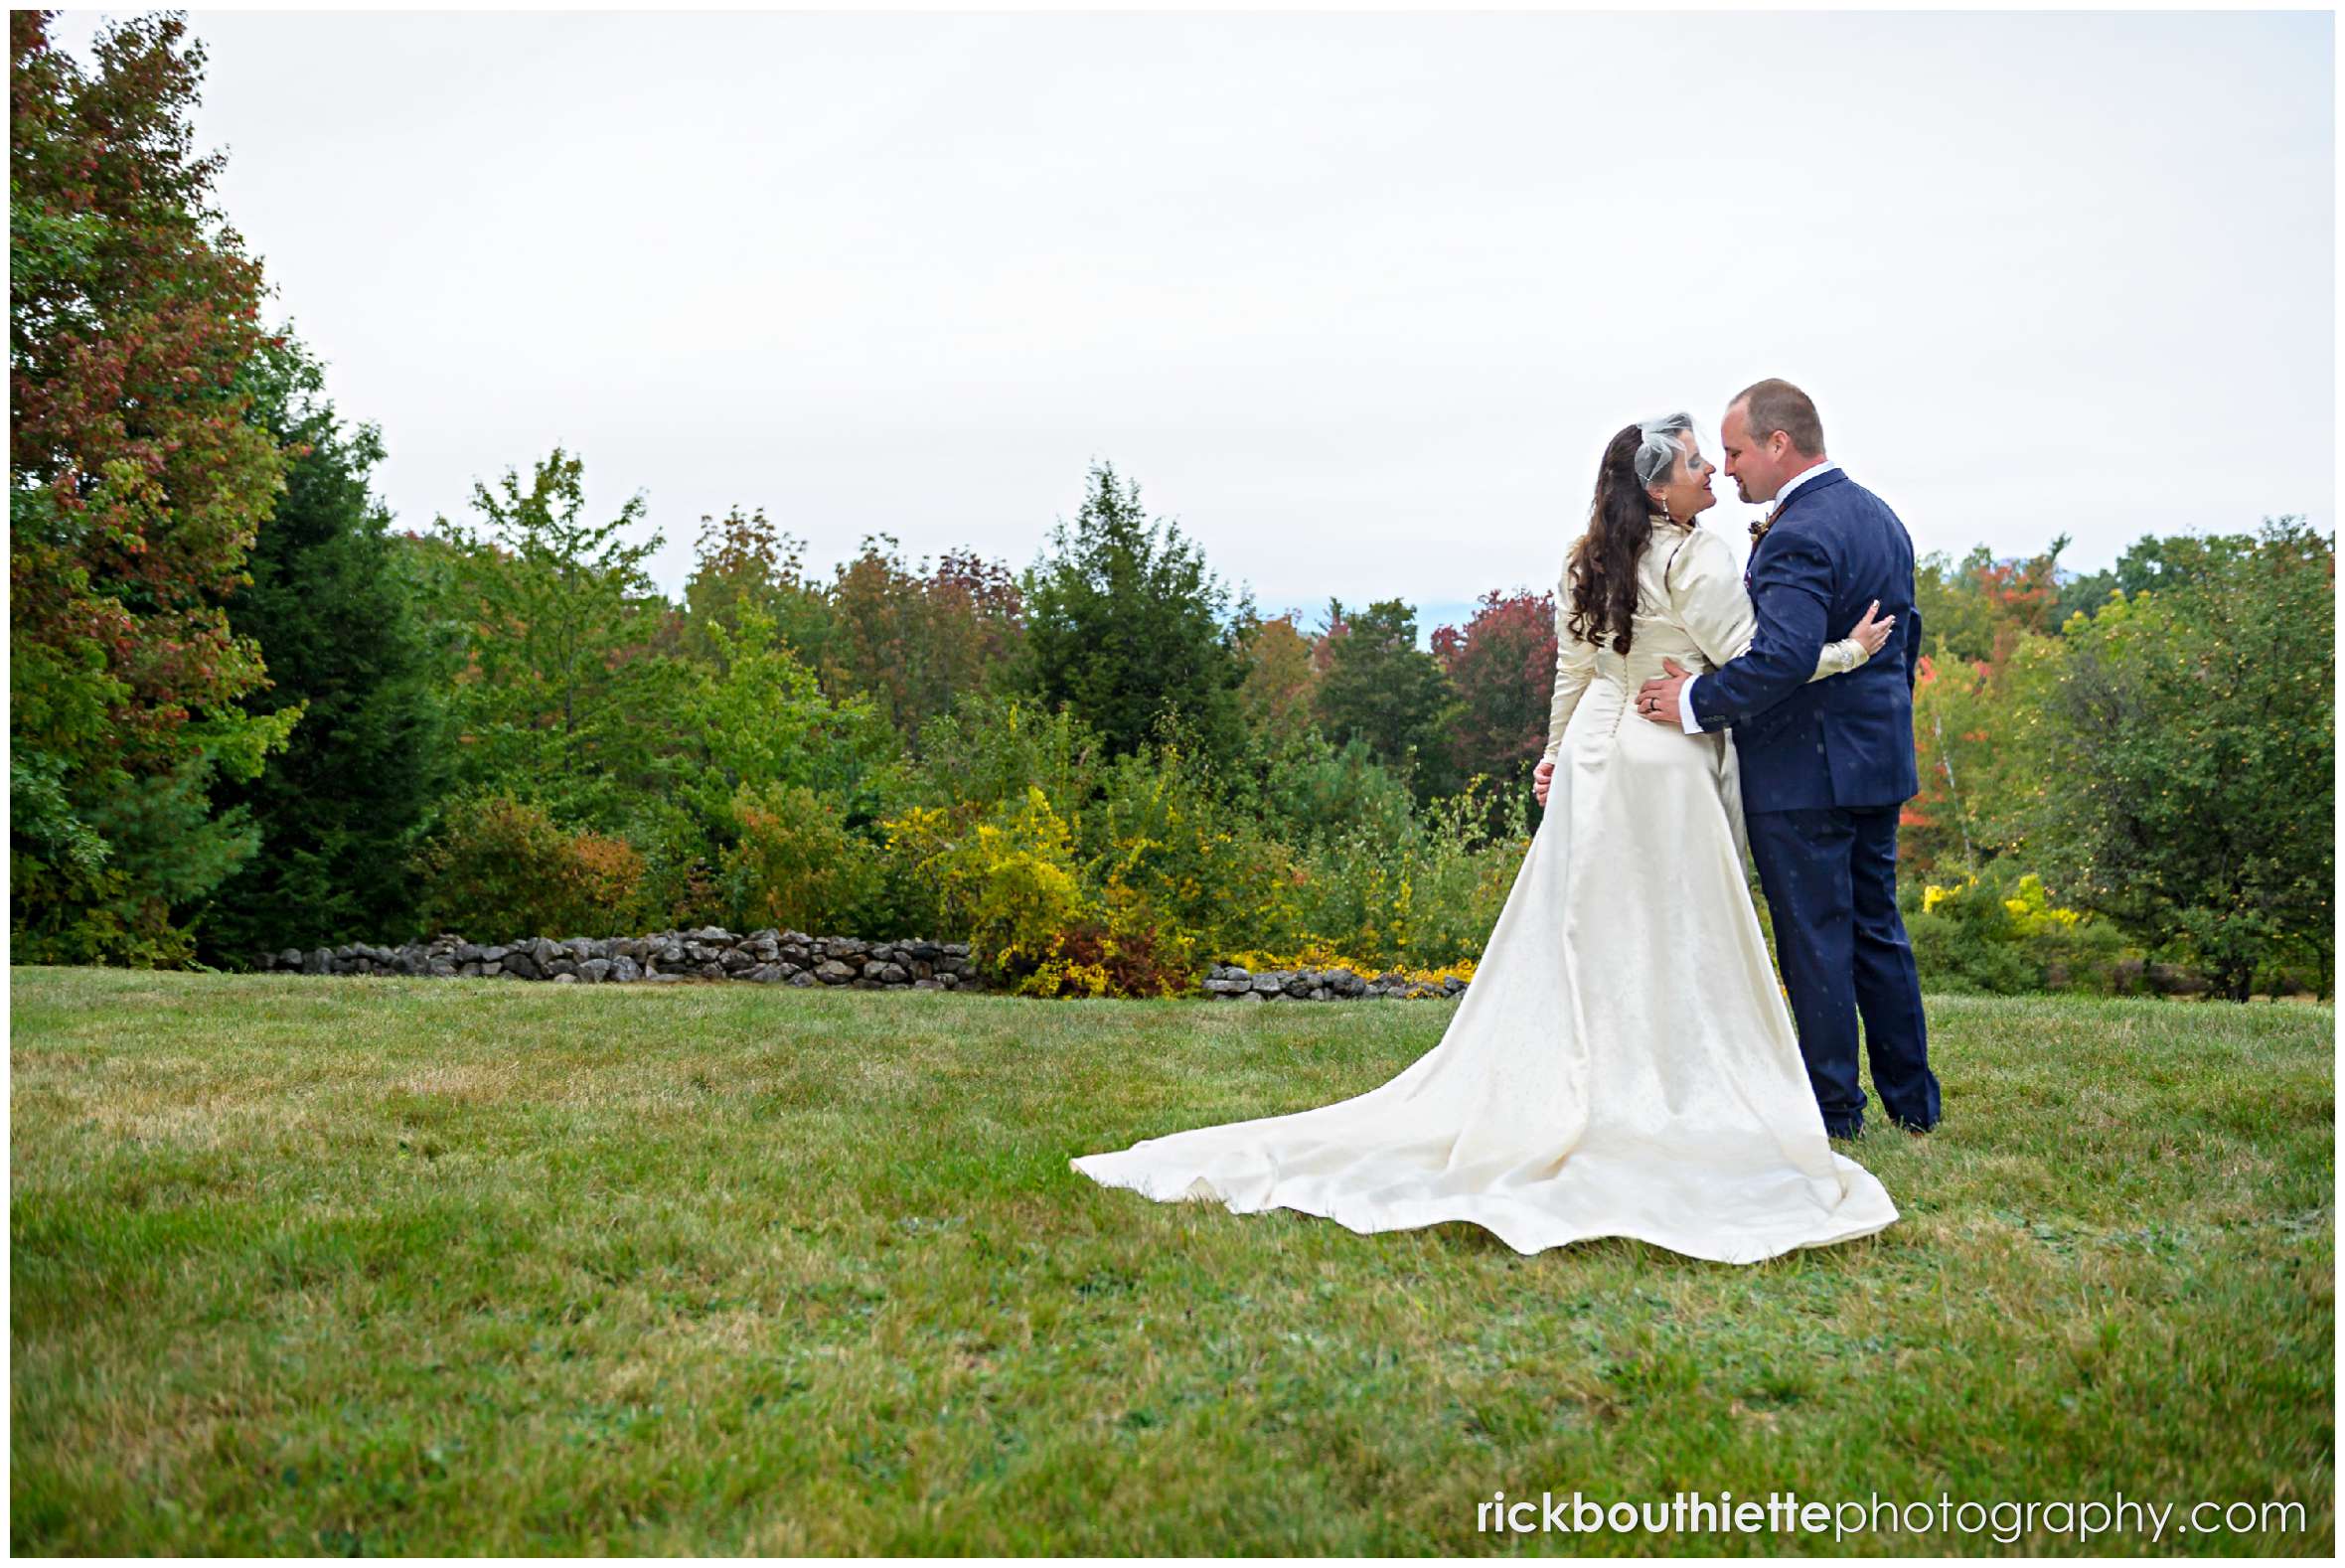 bride and groom enjoying the fall foliage after their wedding ceremony